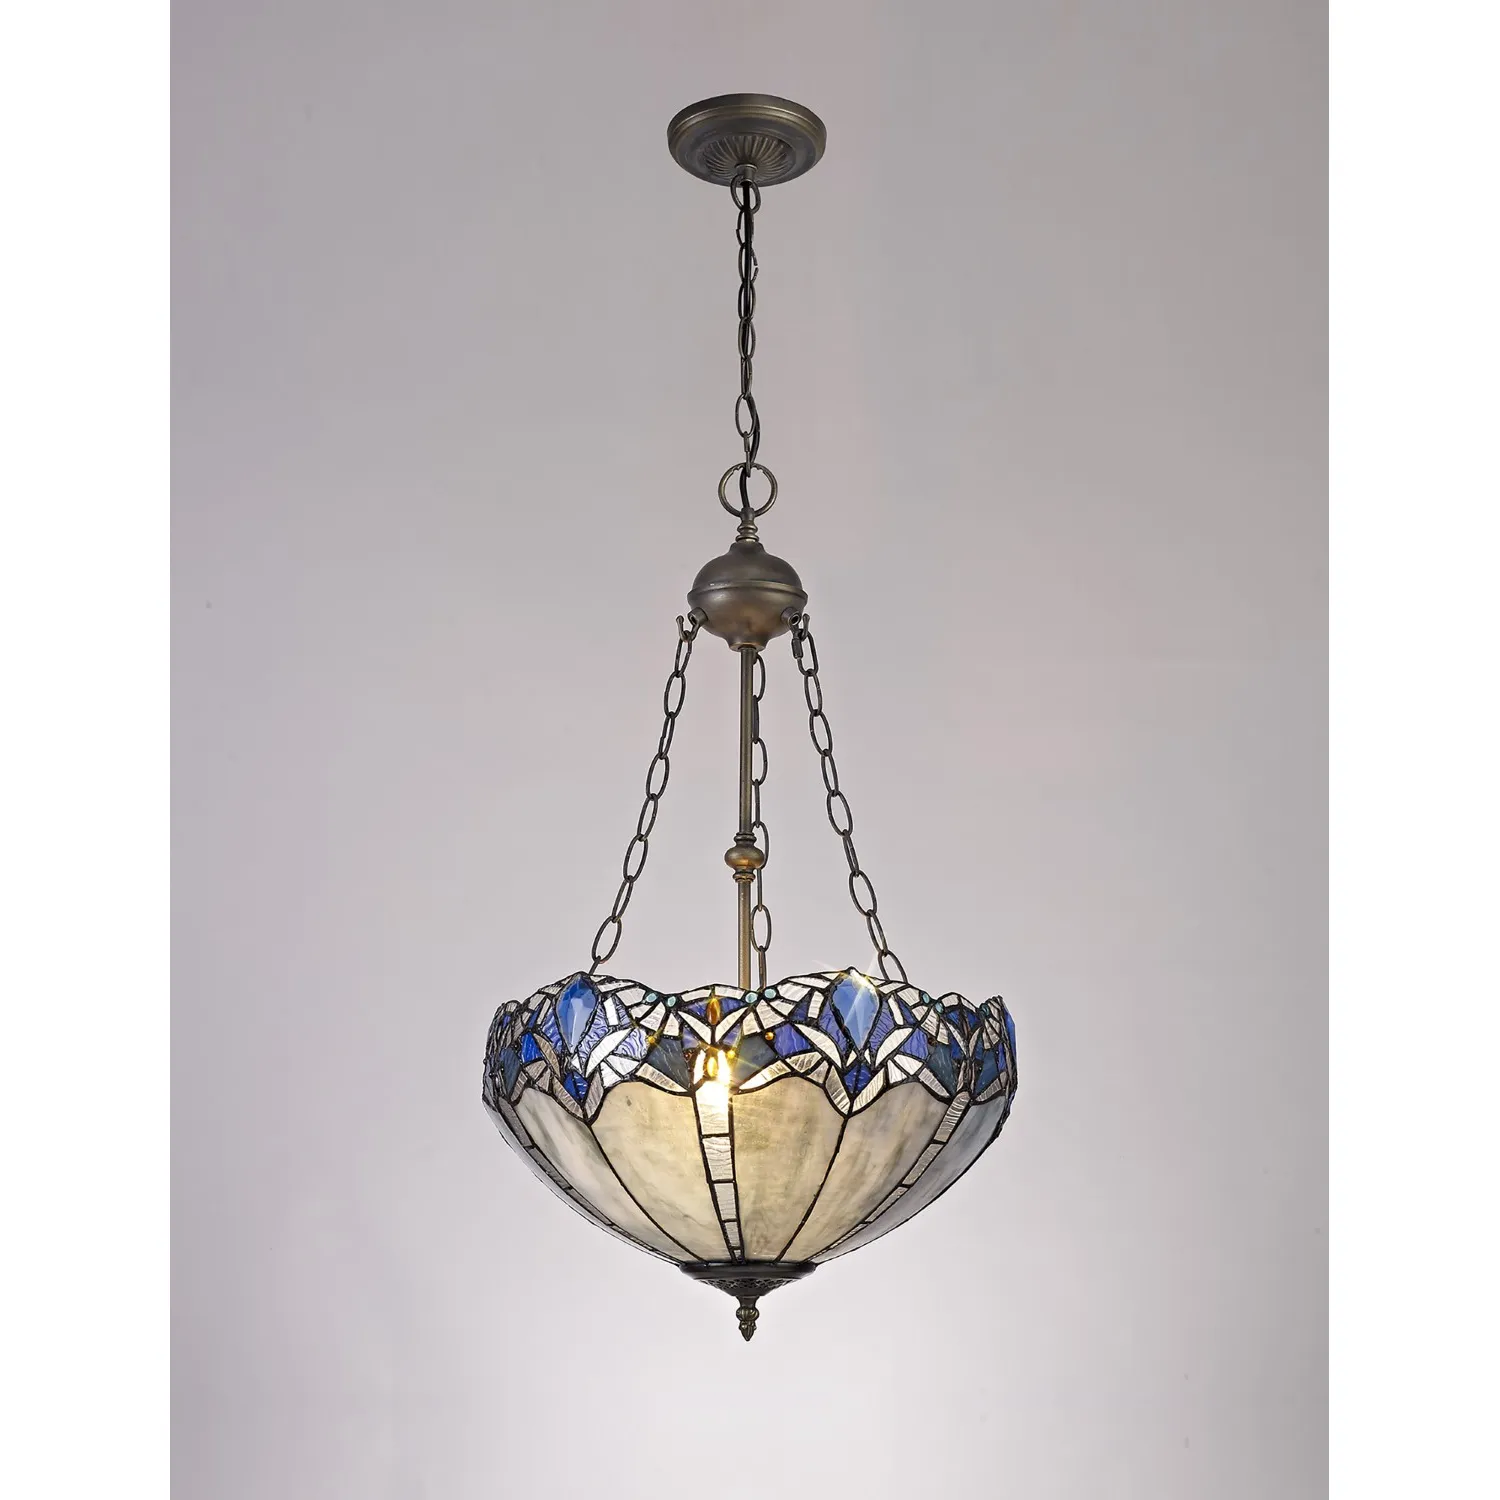 Ardingly 2 Light Uplighter Pendant E27 With 40cm Tiffany Shade, Blue Clear Crystal Aged Antique Brass